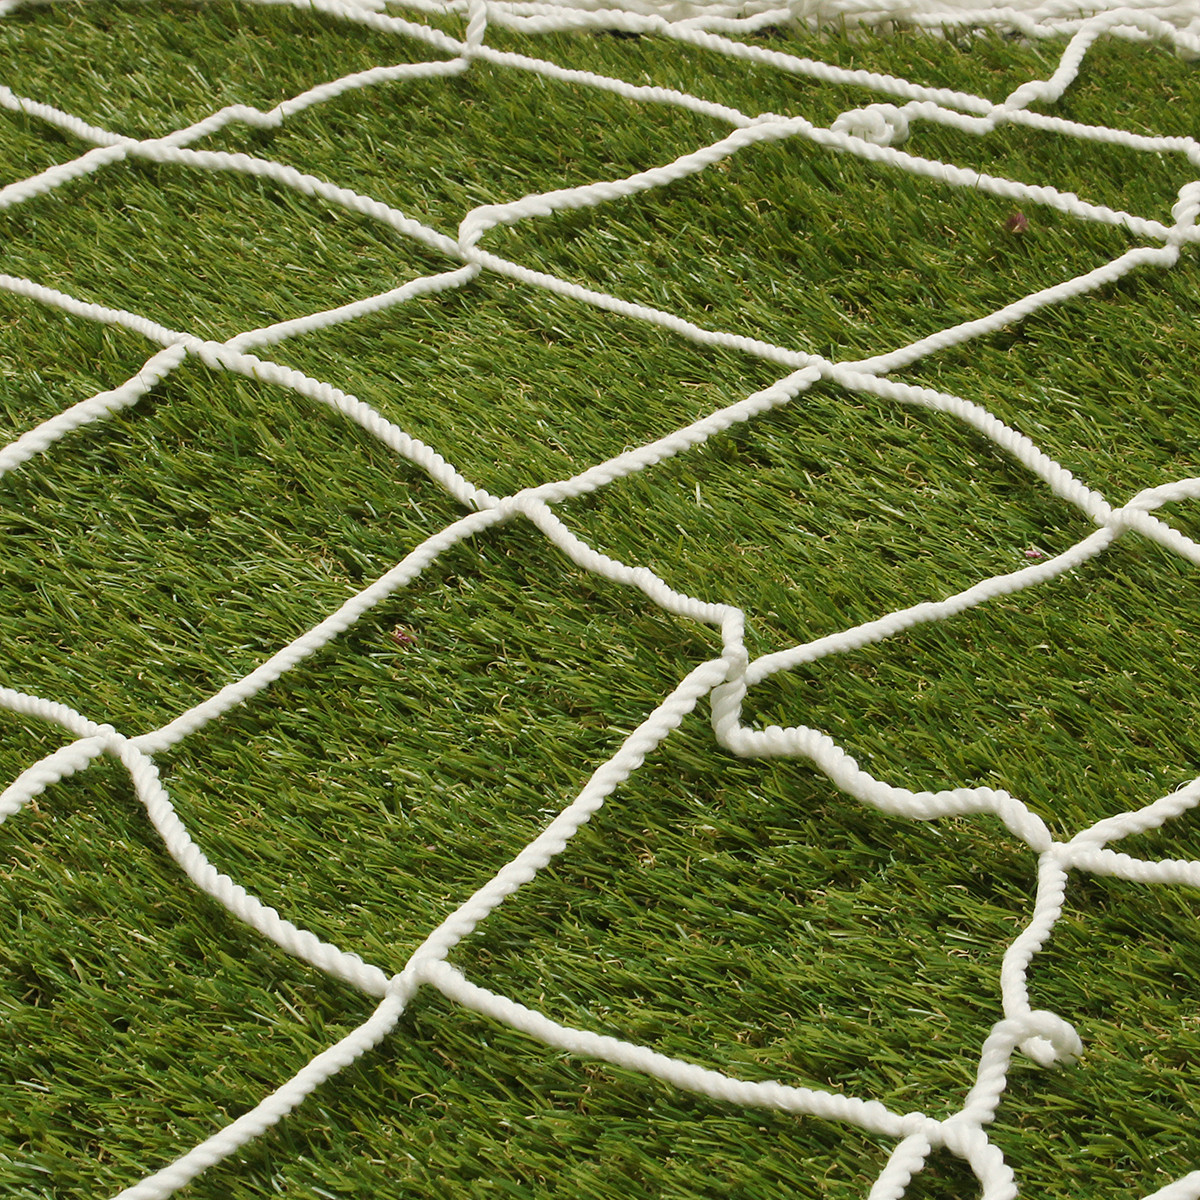 Football-Soccer-Goal-Post-Net-Training-Match-Replace-Outdoor-Full-Size-Adult-Kid-1249189-4